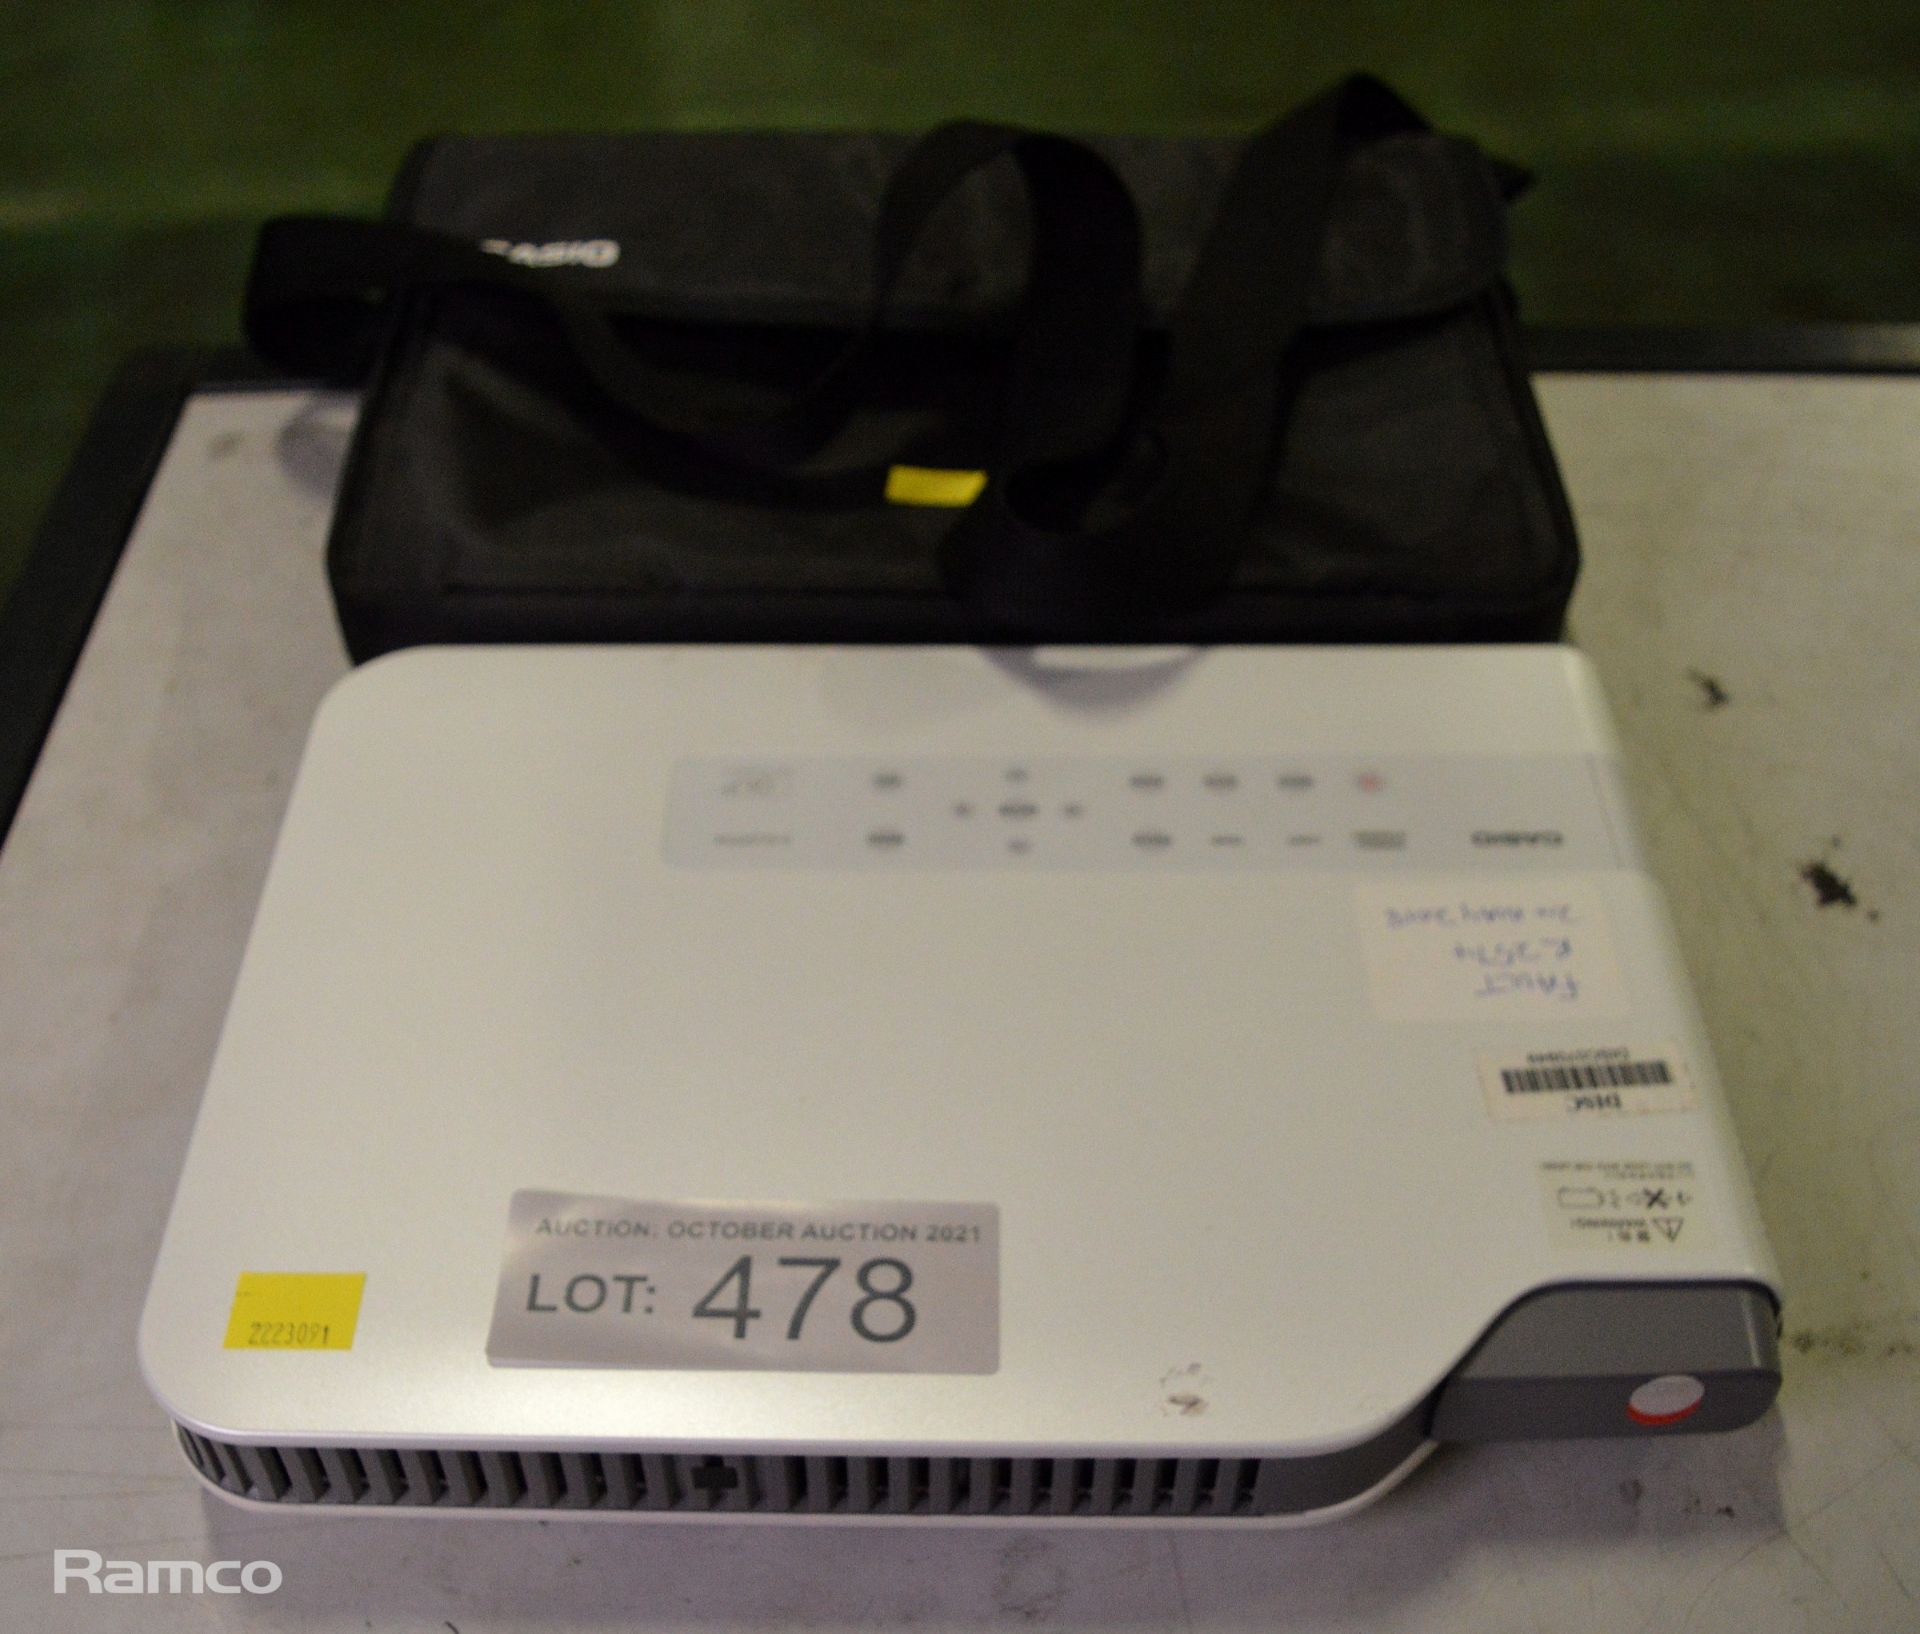 Casio XJ-A240V Data Projector with Bag